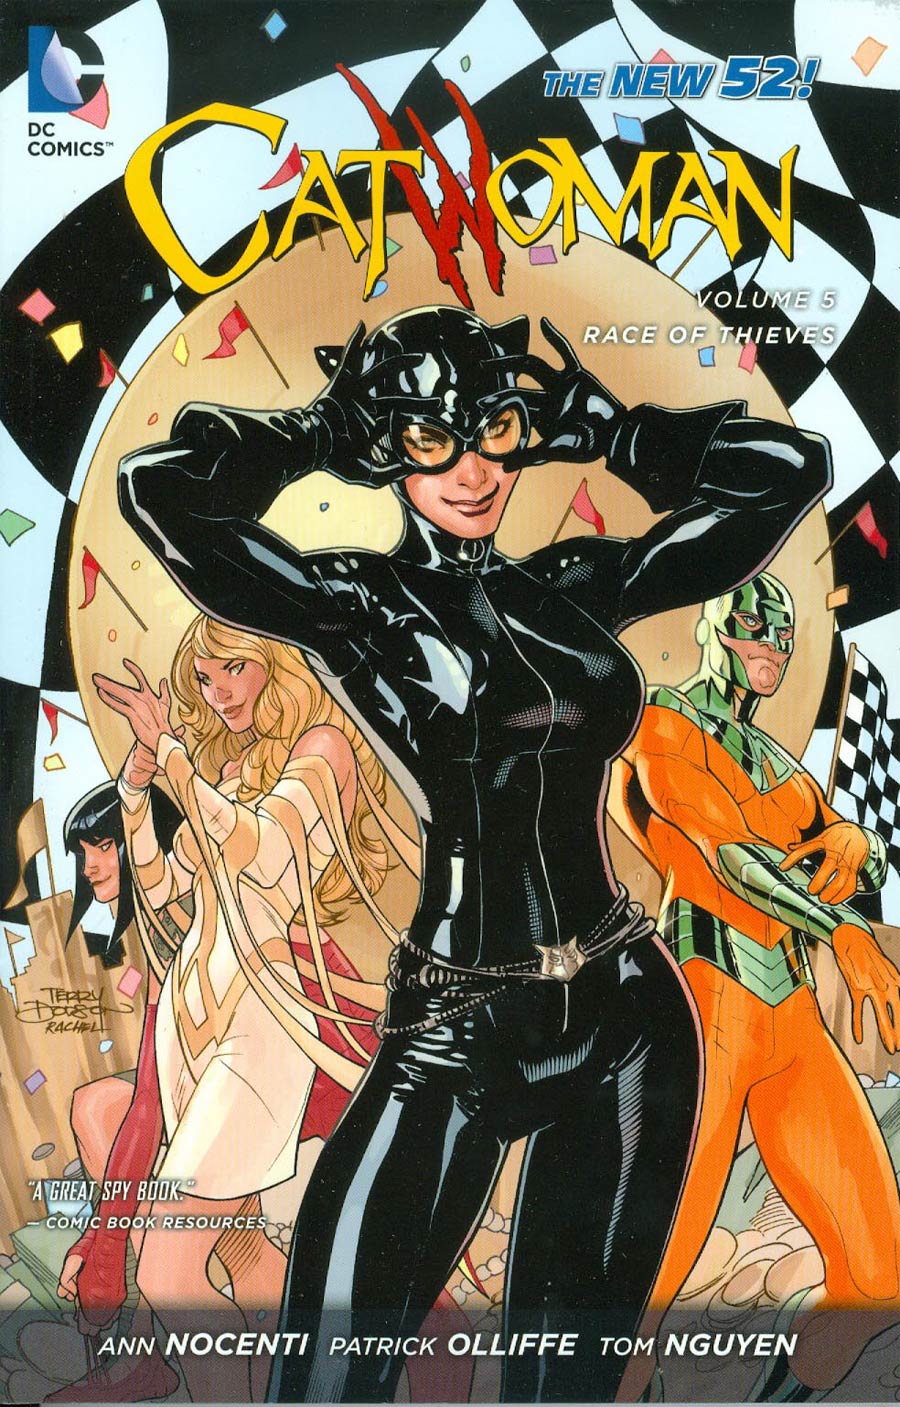 Catwoman (New 52) Vol 5 Race Of Thieves TP